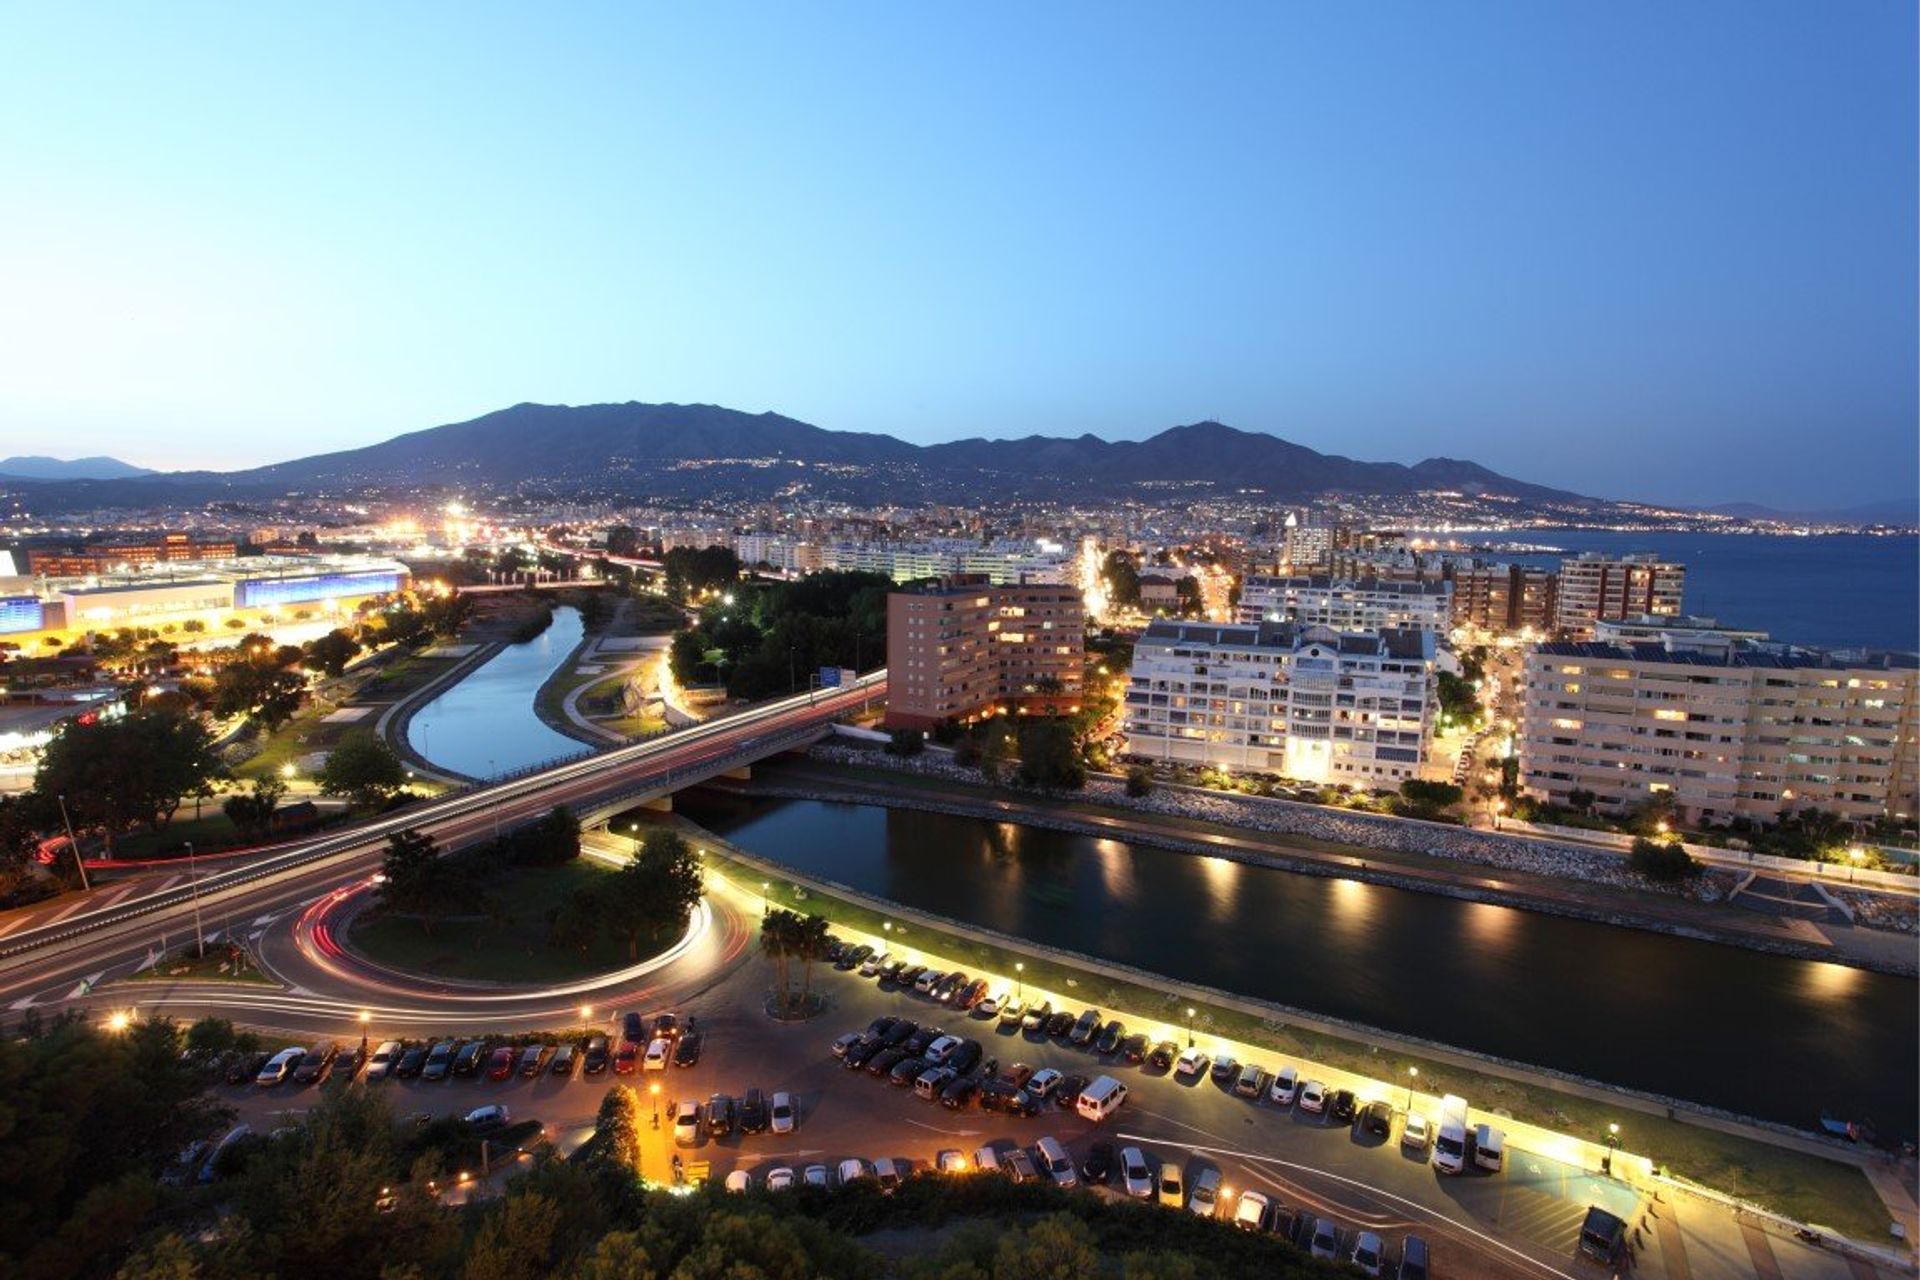 Fuengirola's city centre is a hive of activity, with train and bus links, restaurants, bars and cafes